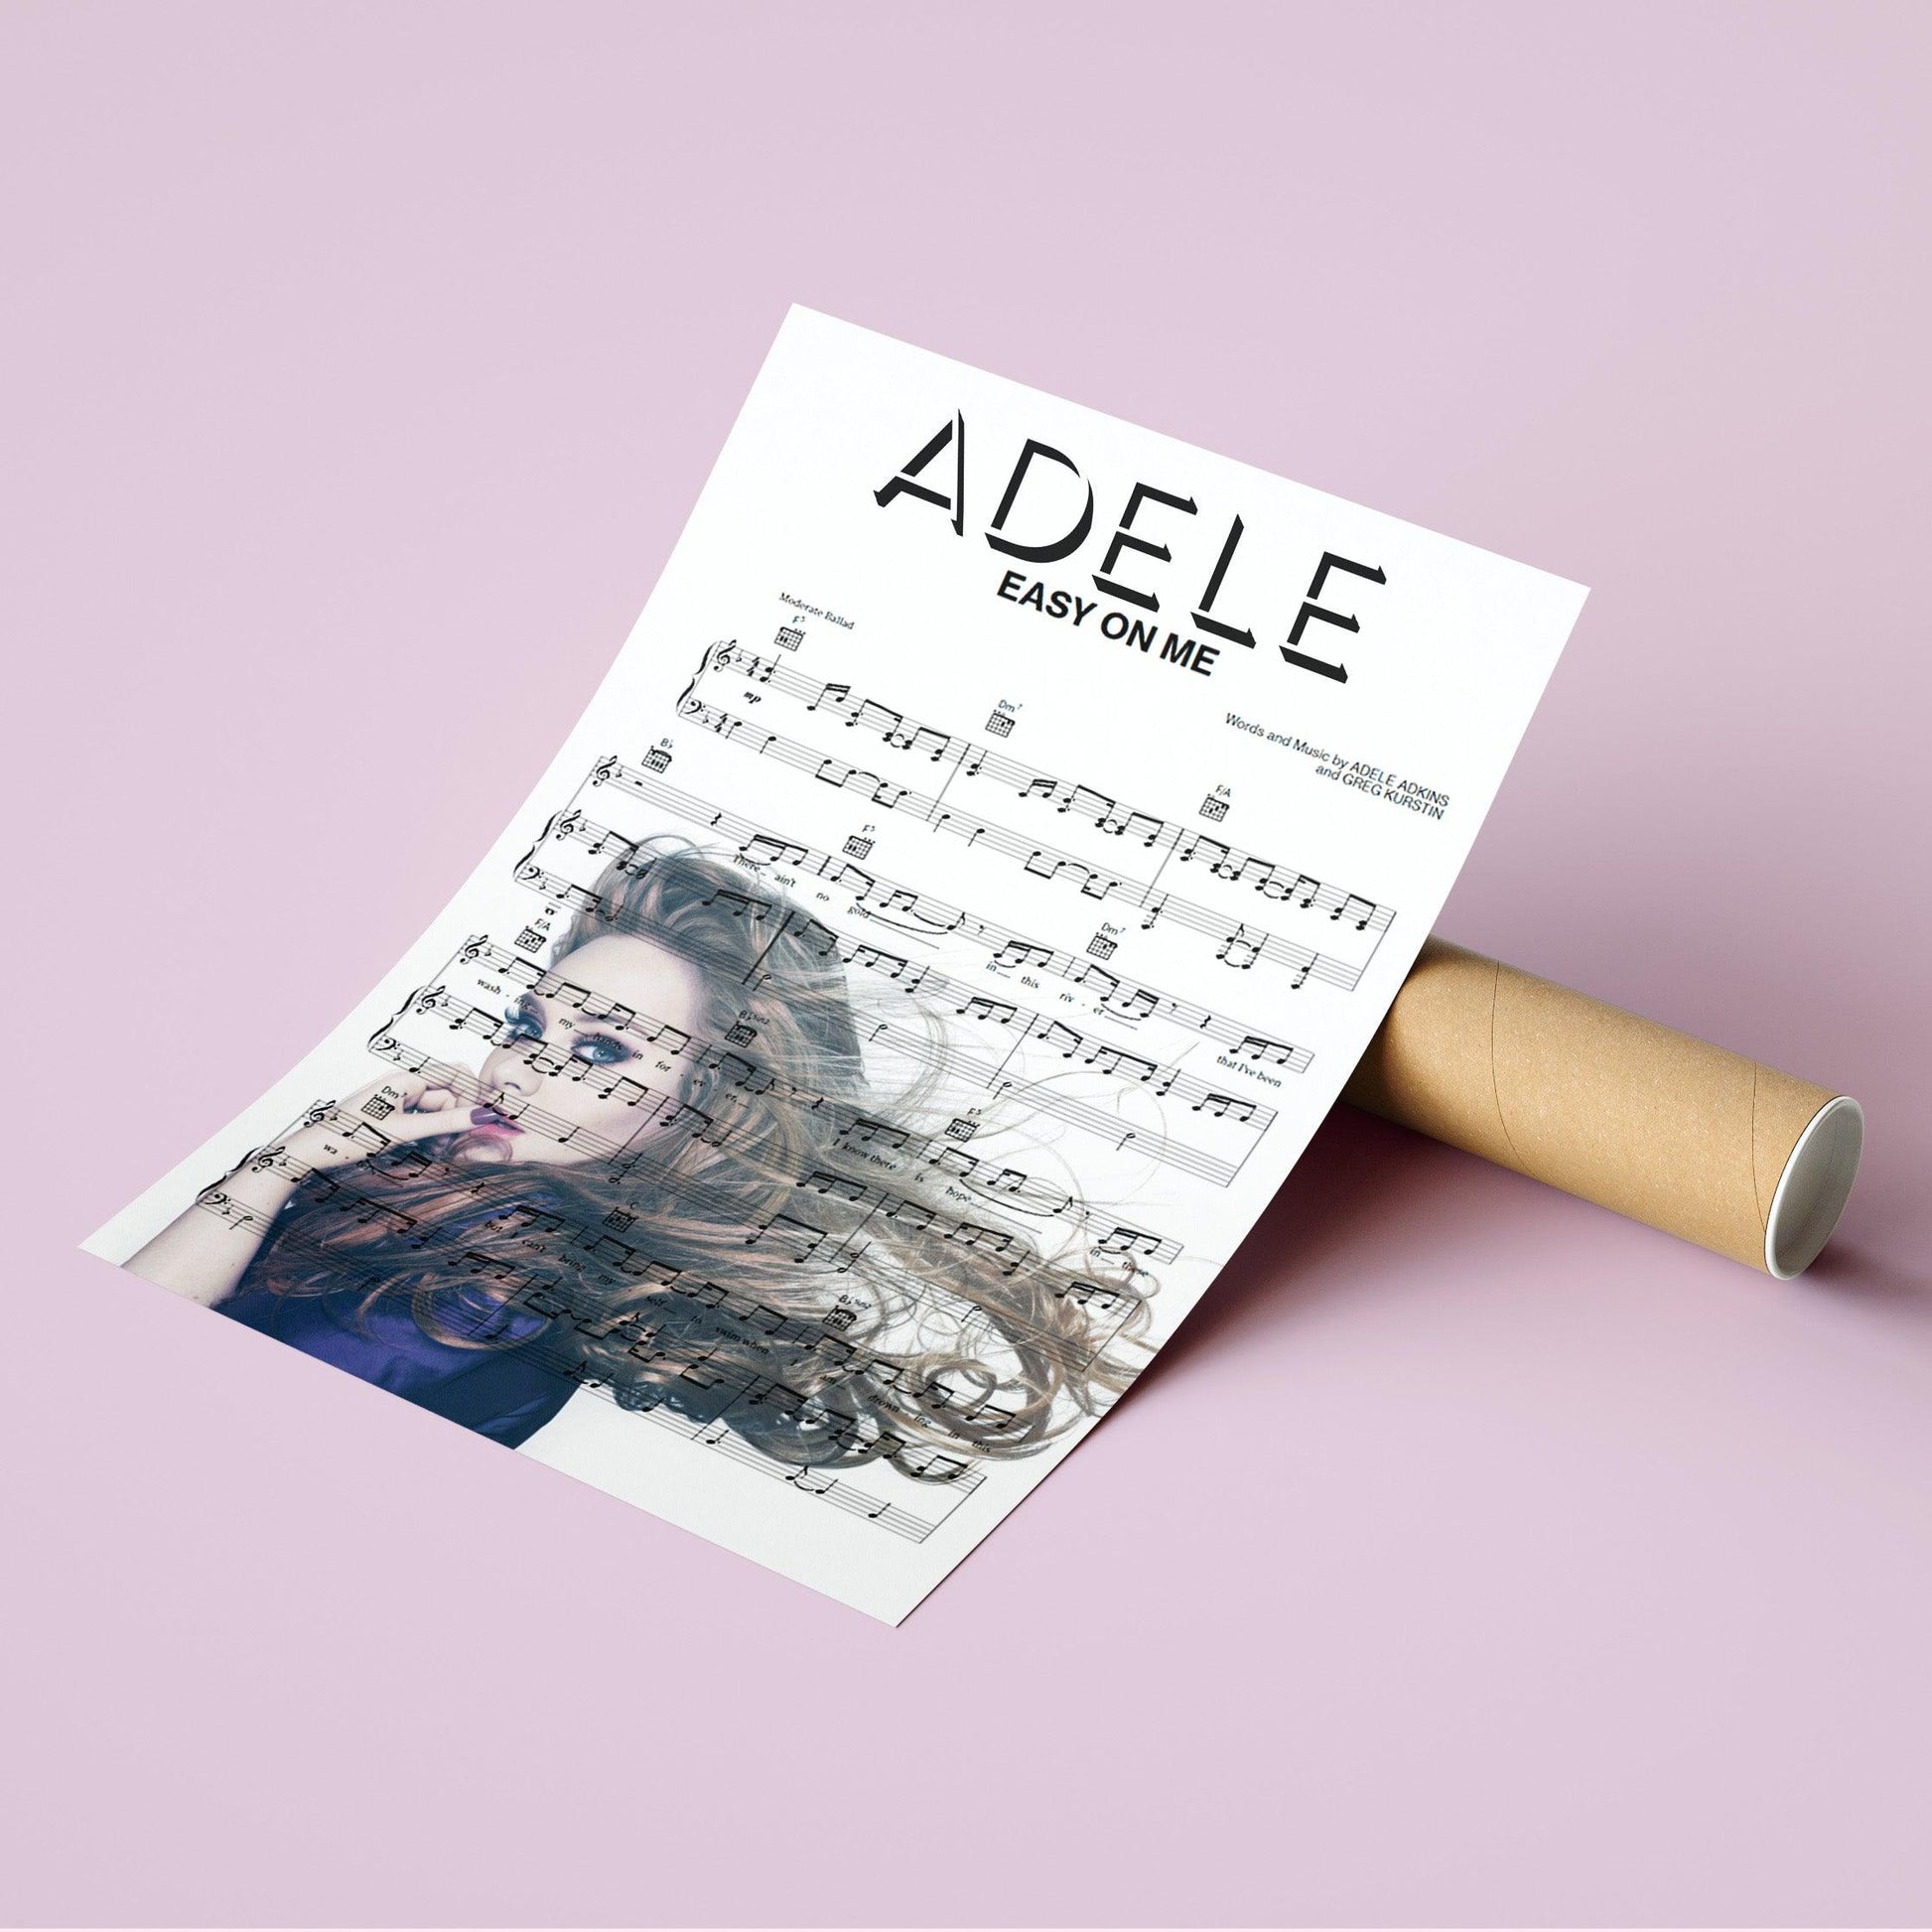 Adele ~ Easy On Me Song Music Print | Song Music Sheet Notes Print  Everyone has a favorite song and now you can show the score as printed staff. The personal favorite song sheet print shows the song chosen as the score. 